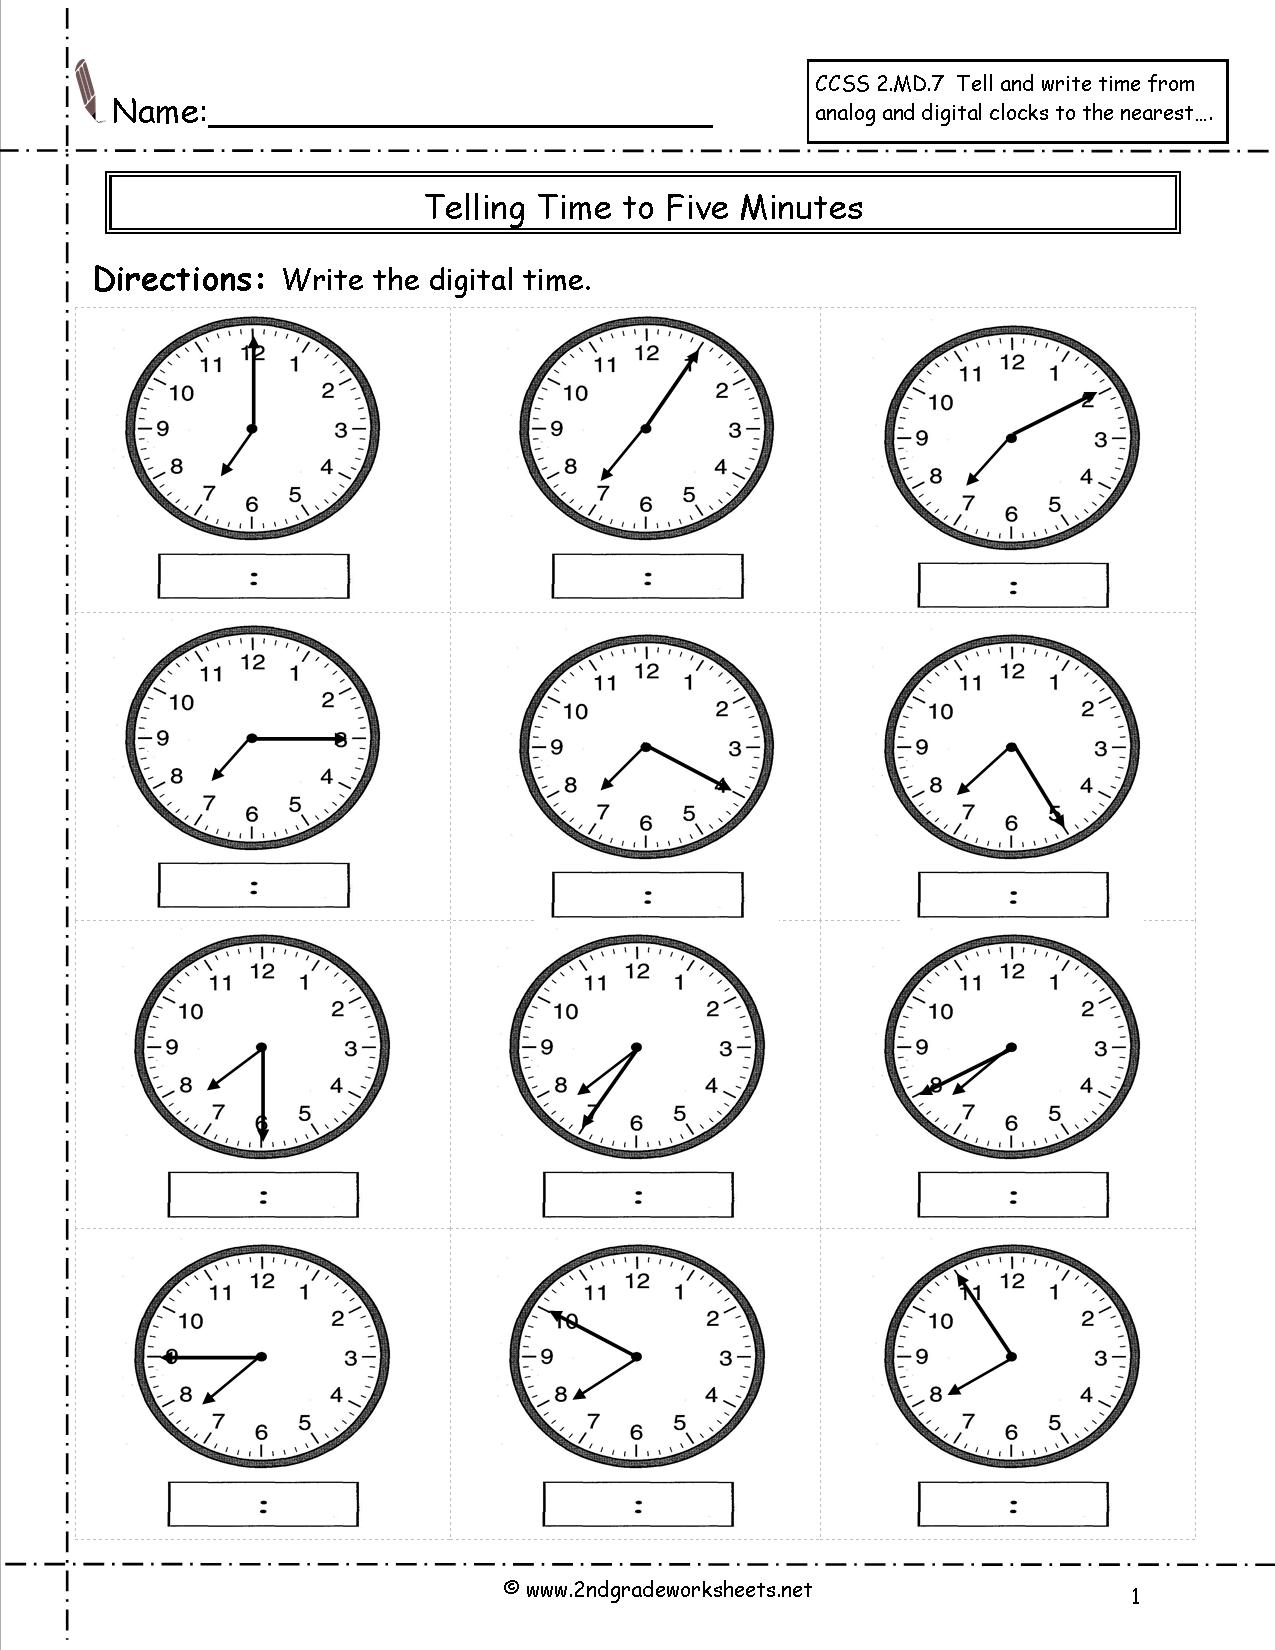 telling-time-clock-worksheets-to-5-minutes-17-best-images-of-time